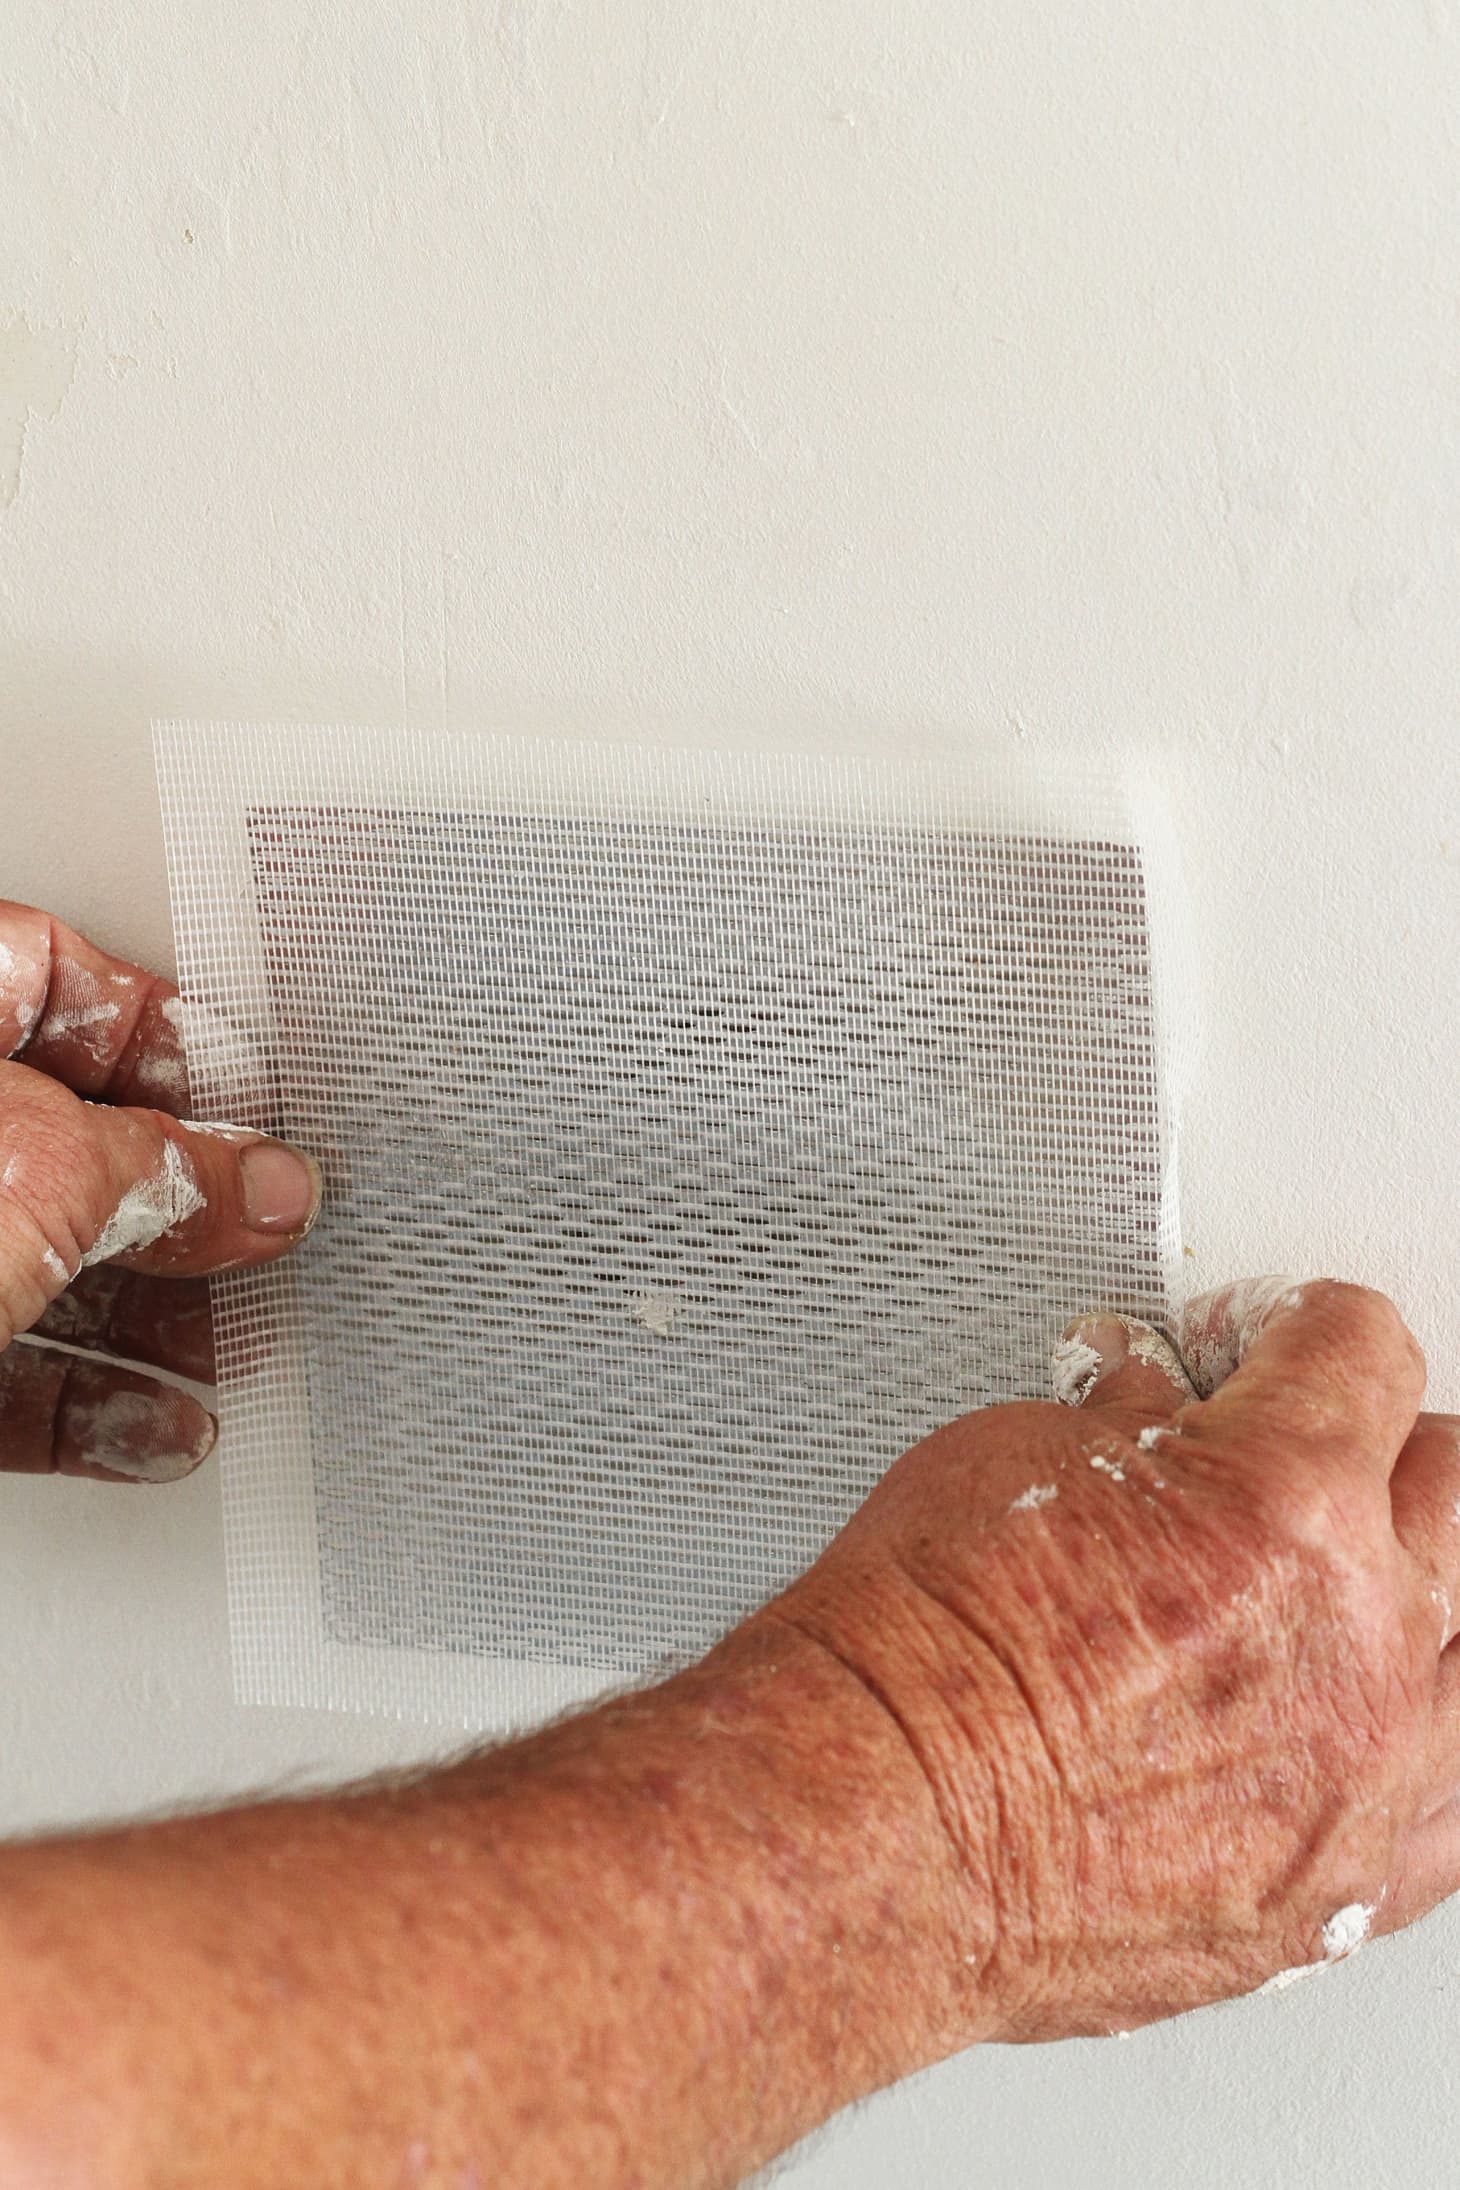 paste to cover wall holes